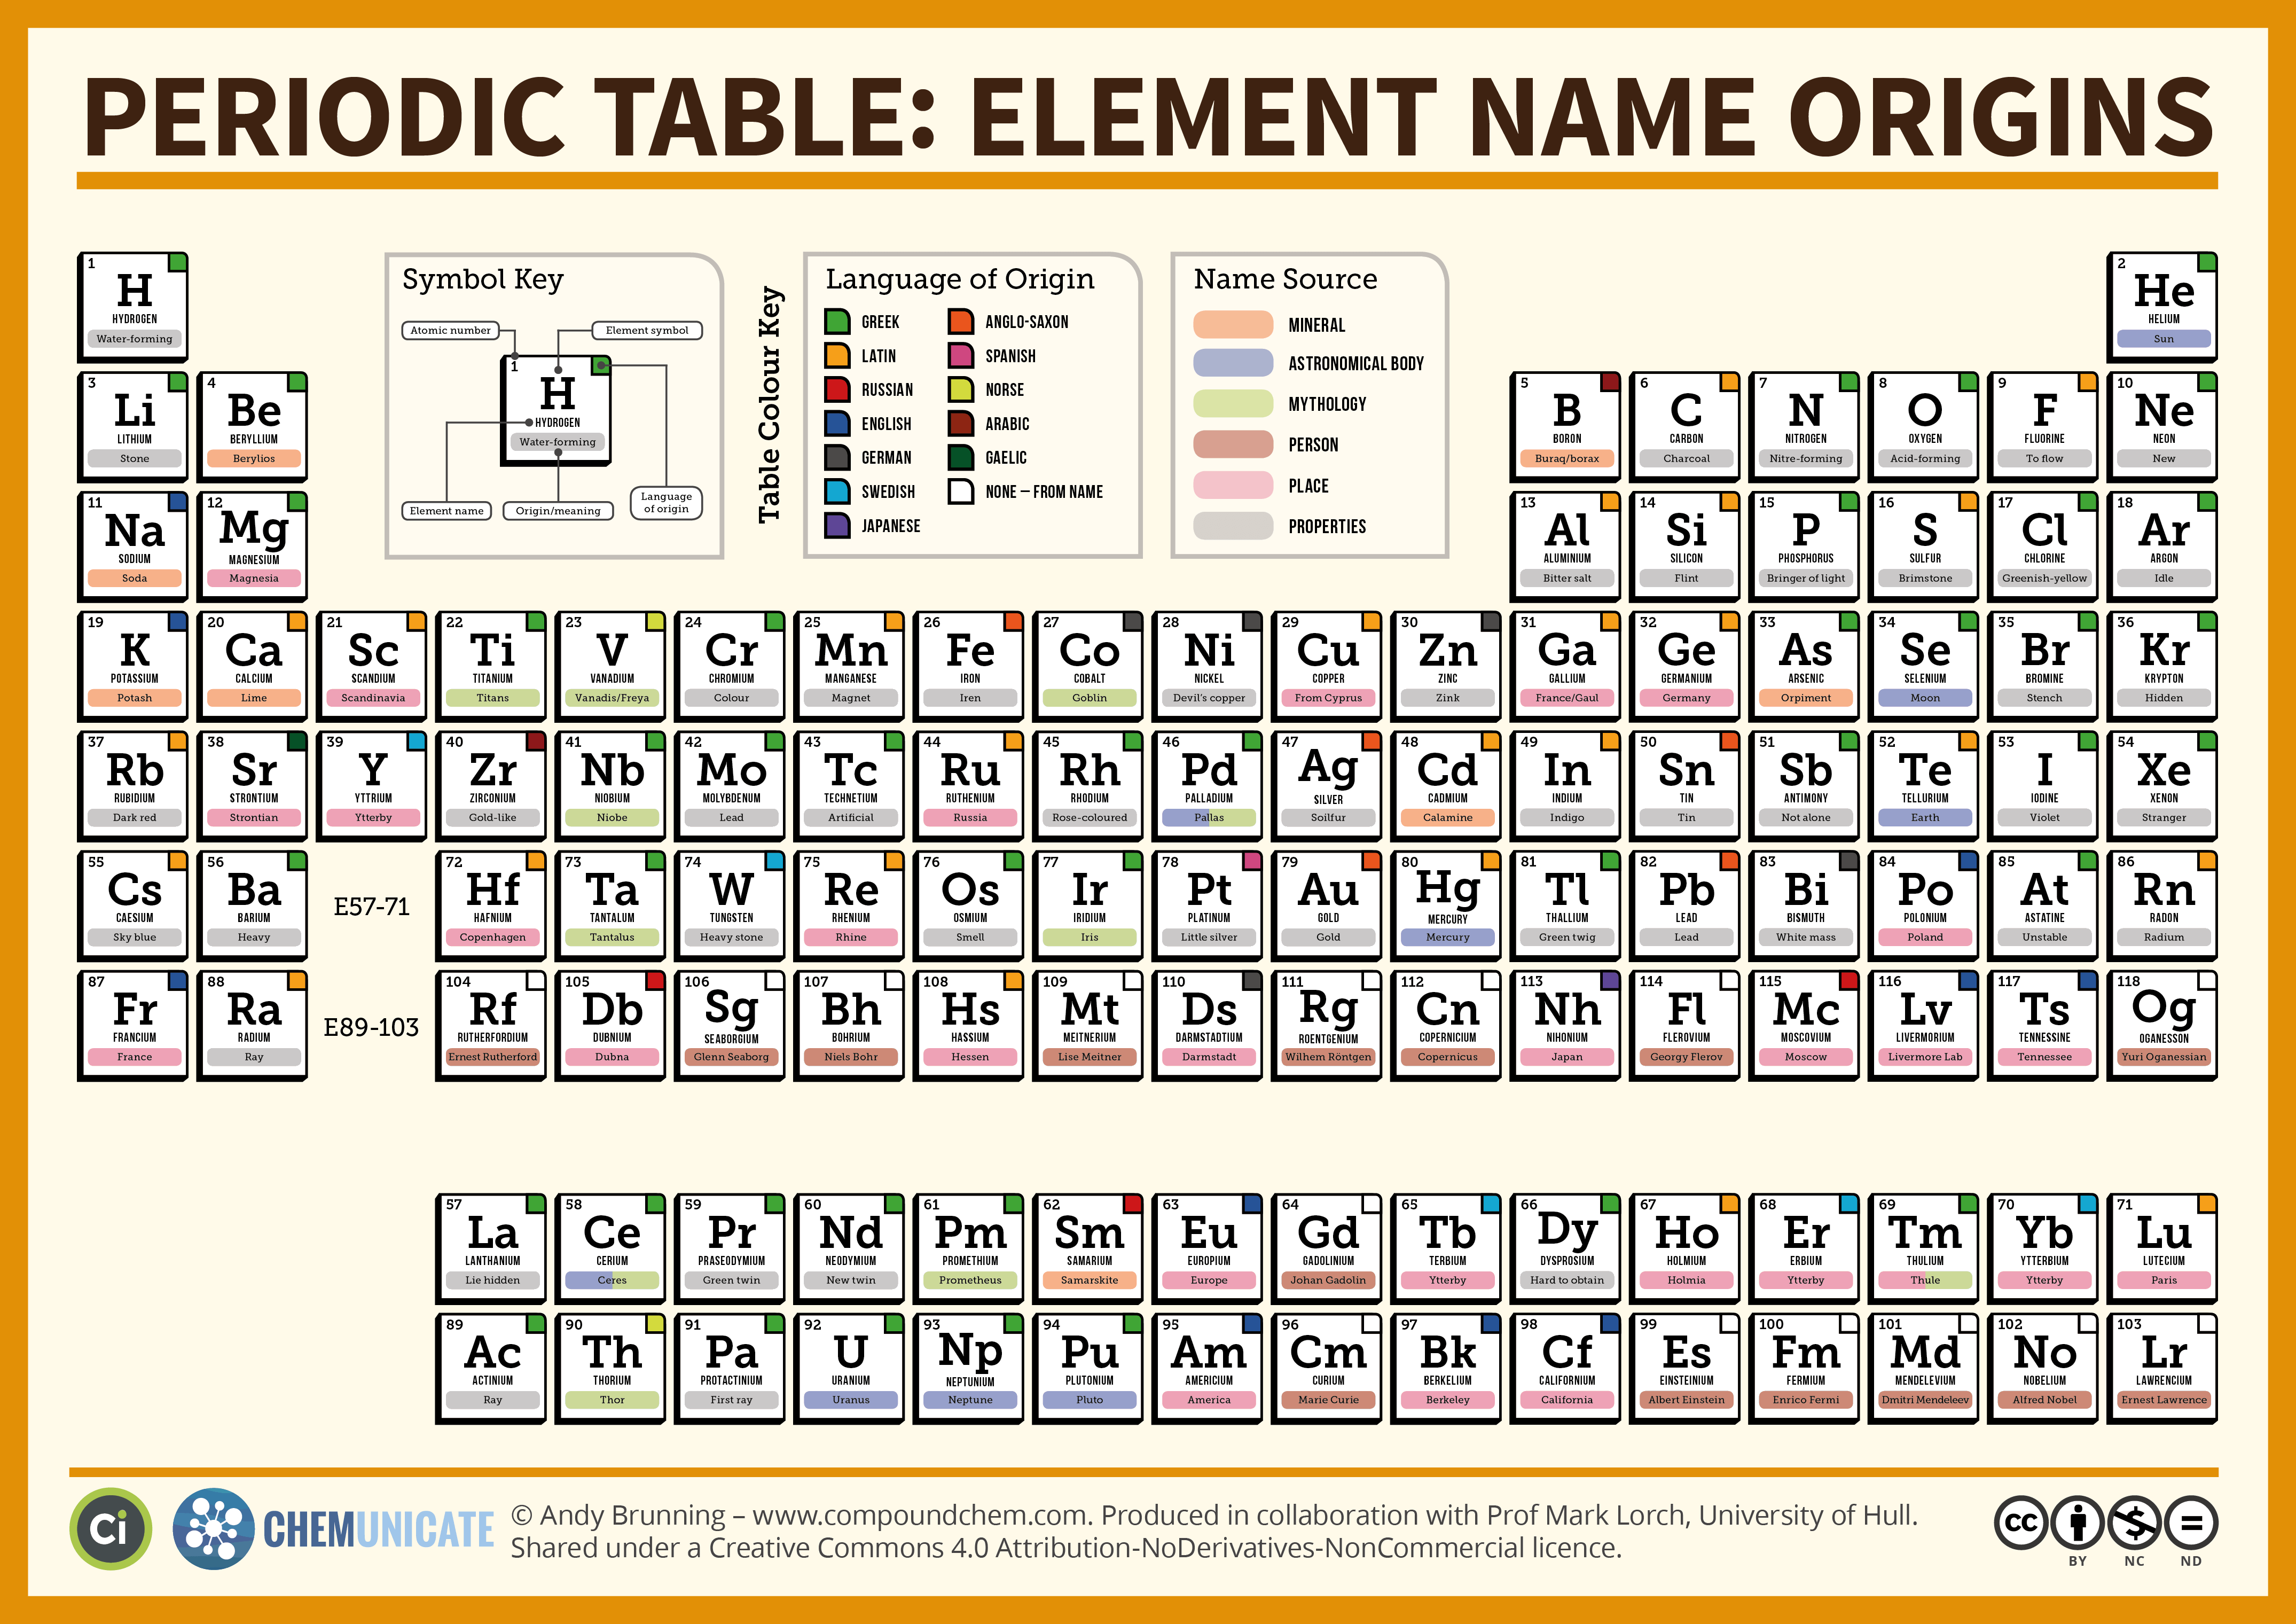 The-Periodic-Table-Element-Name-Origins-L.png